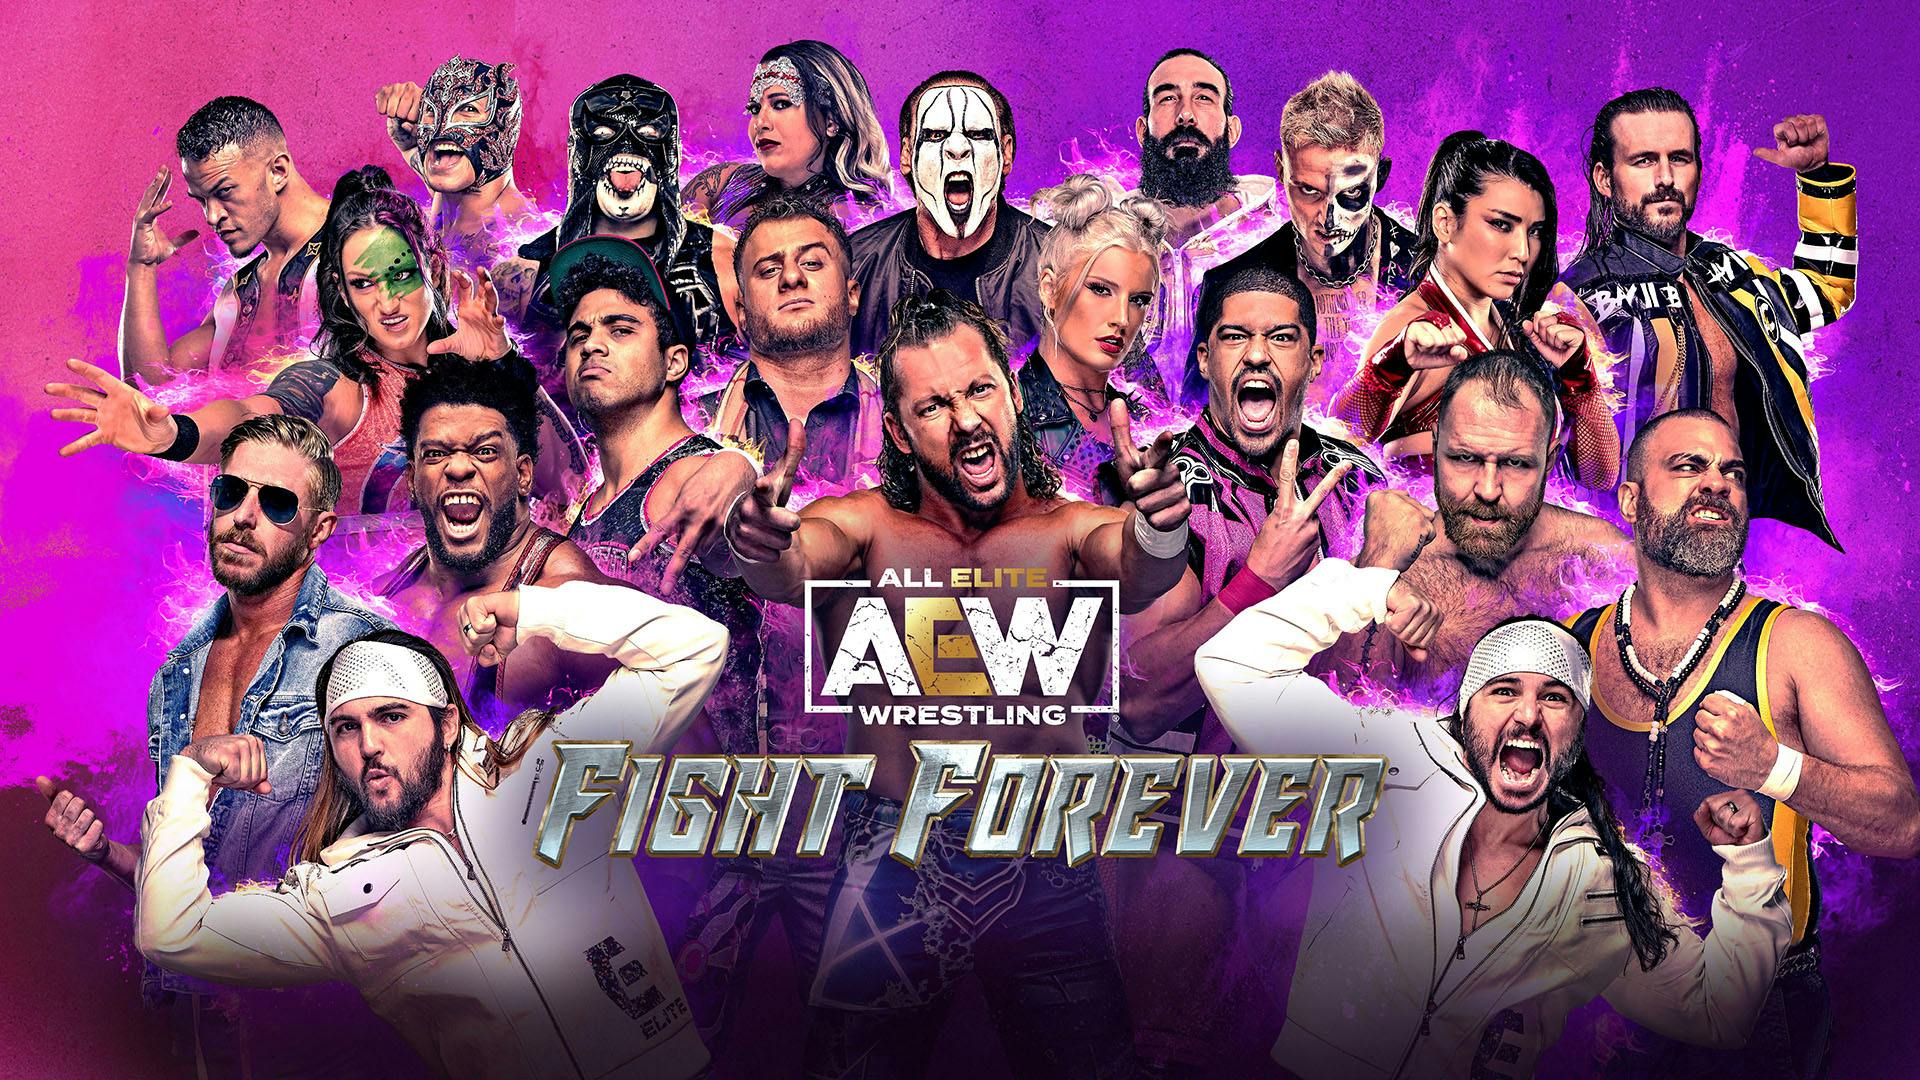 AEW: Fight Site Forever - Game Official